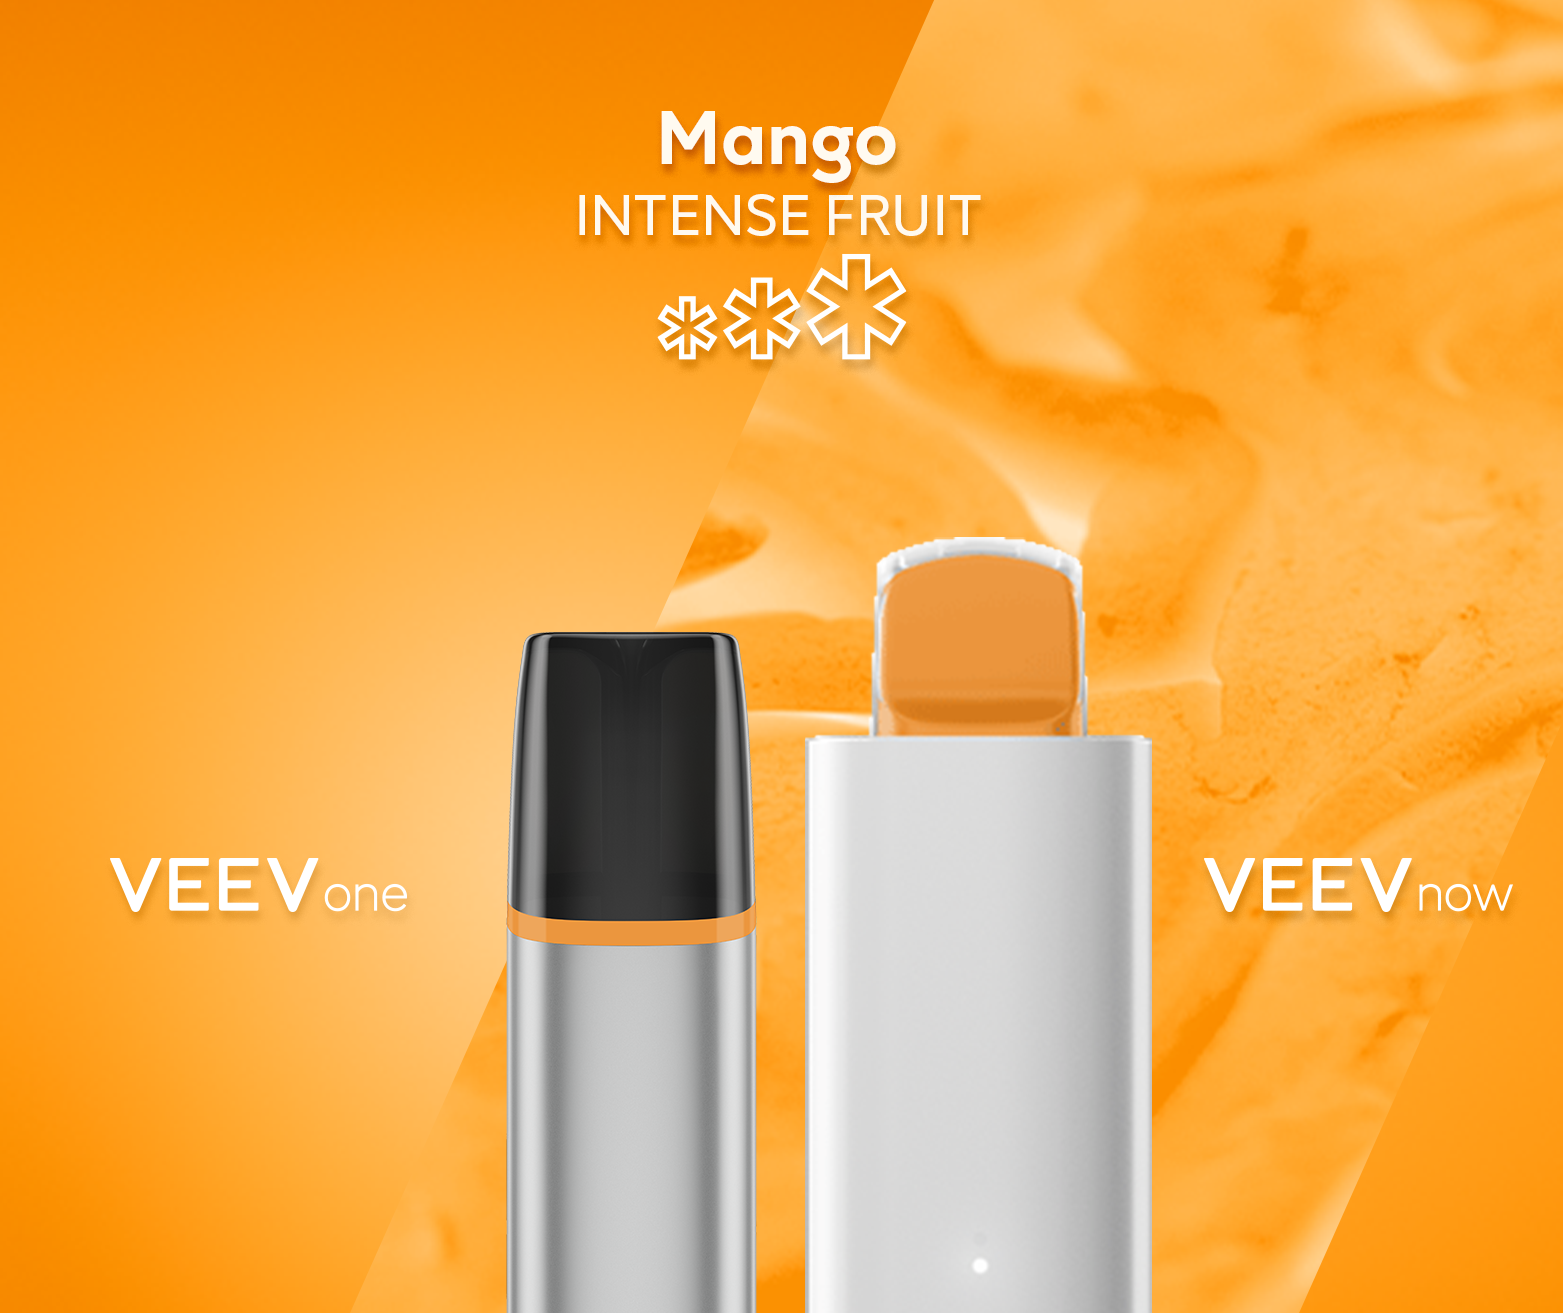 Mango VEEV ONE device and VEEV NOW 5 mL disposable- Intense Fruit